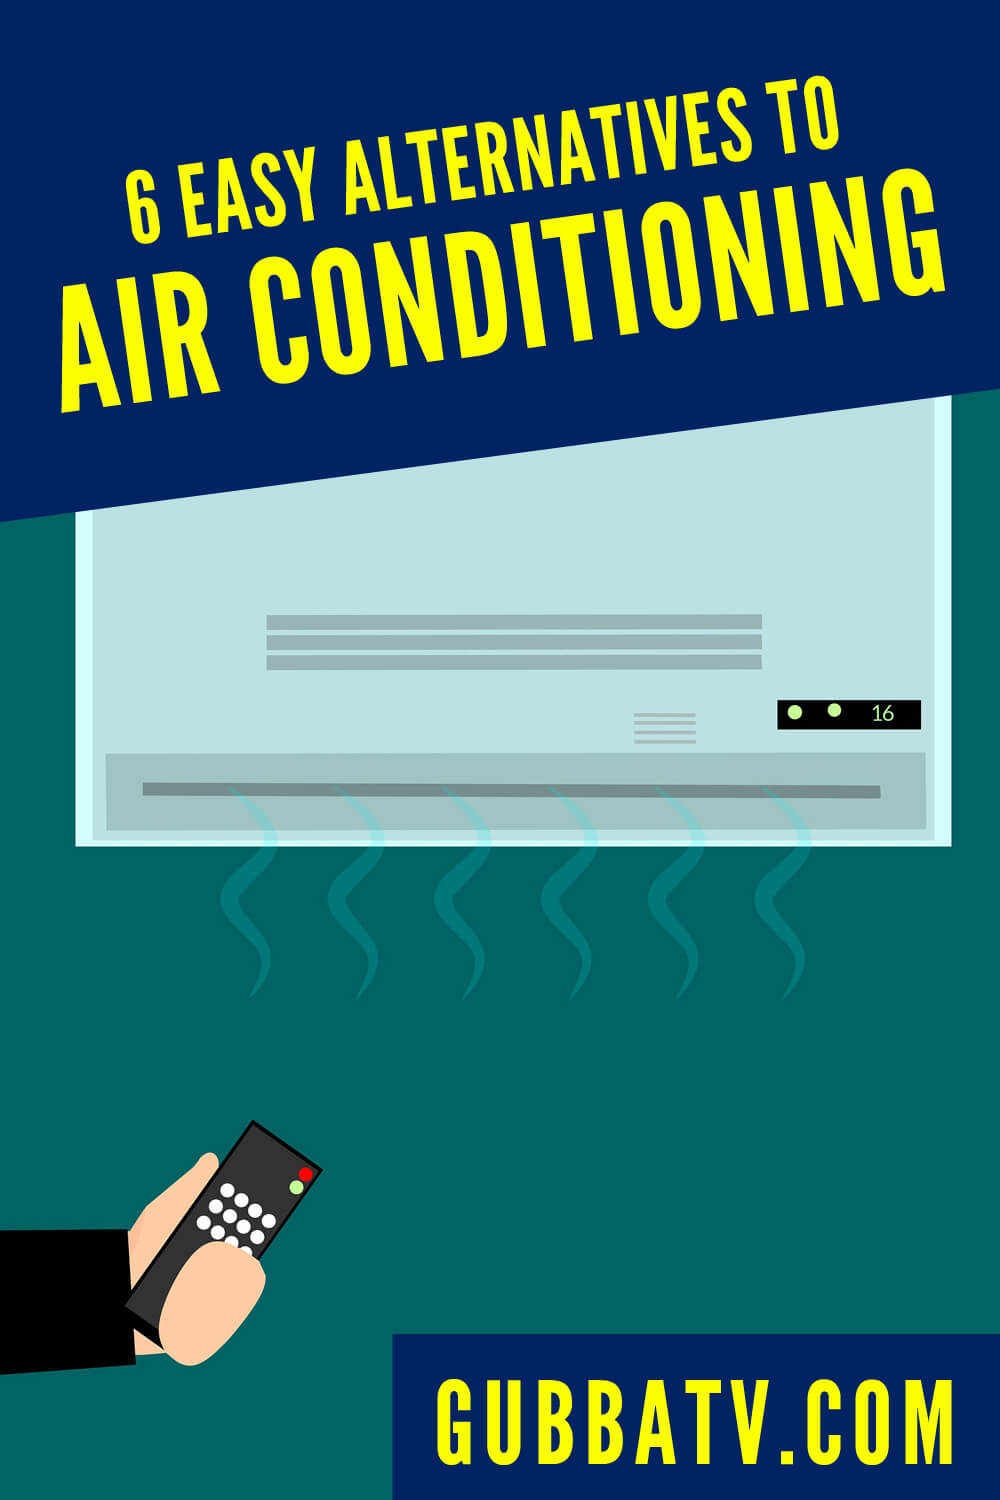 6 Easy Alternatives to Air Conditioning